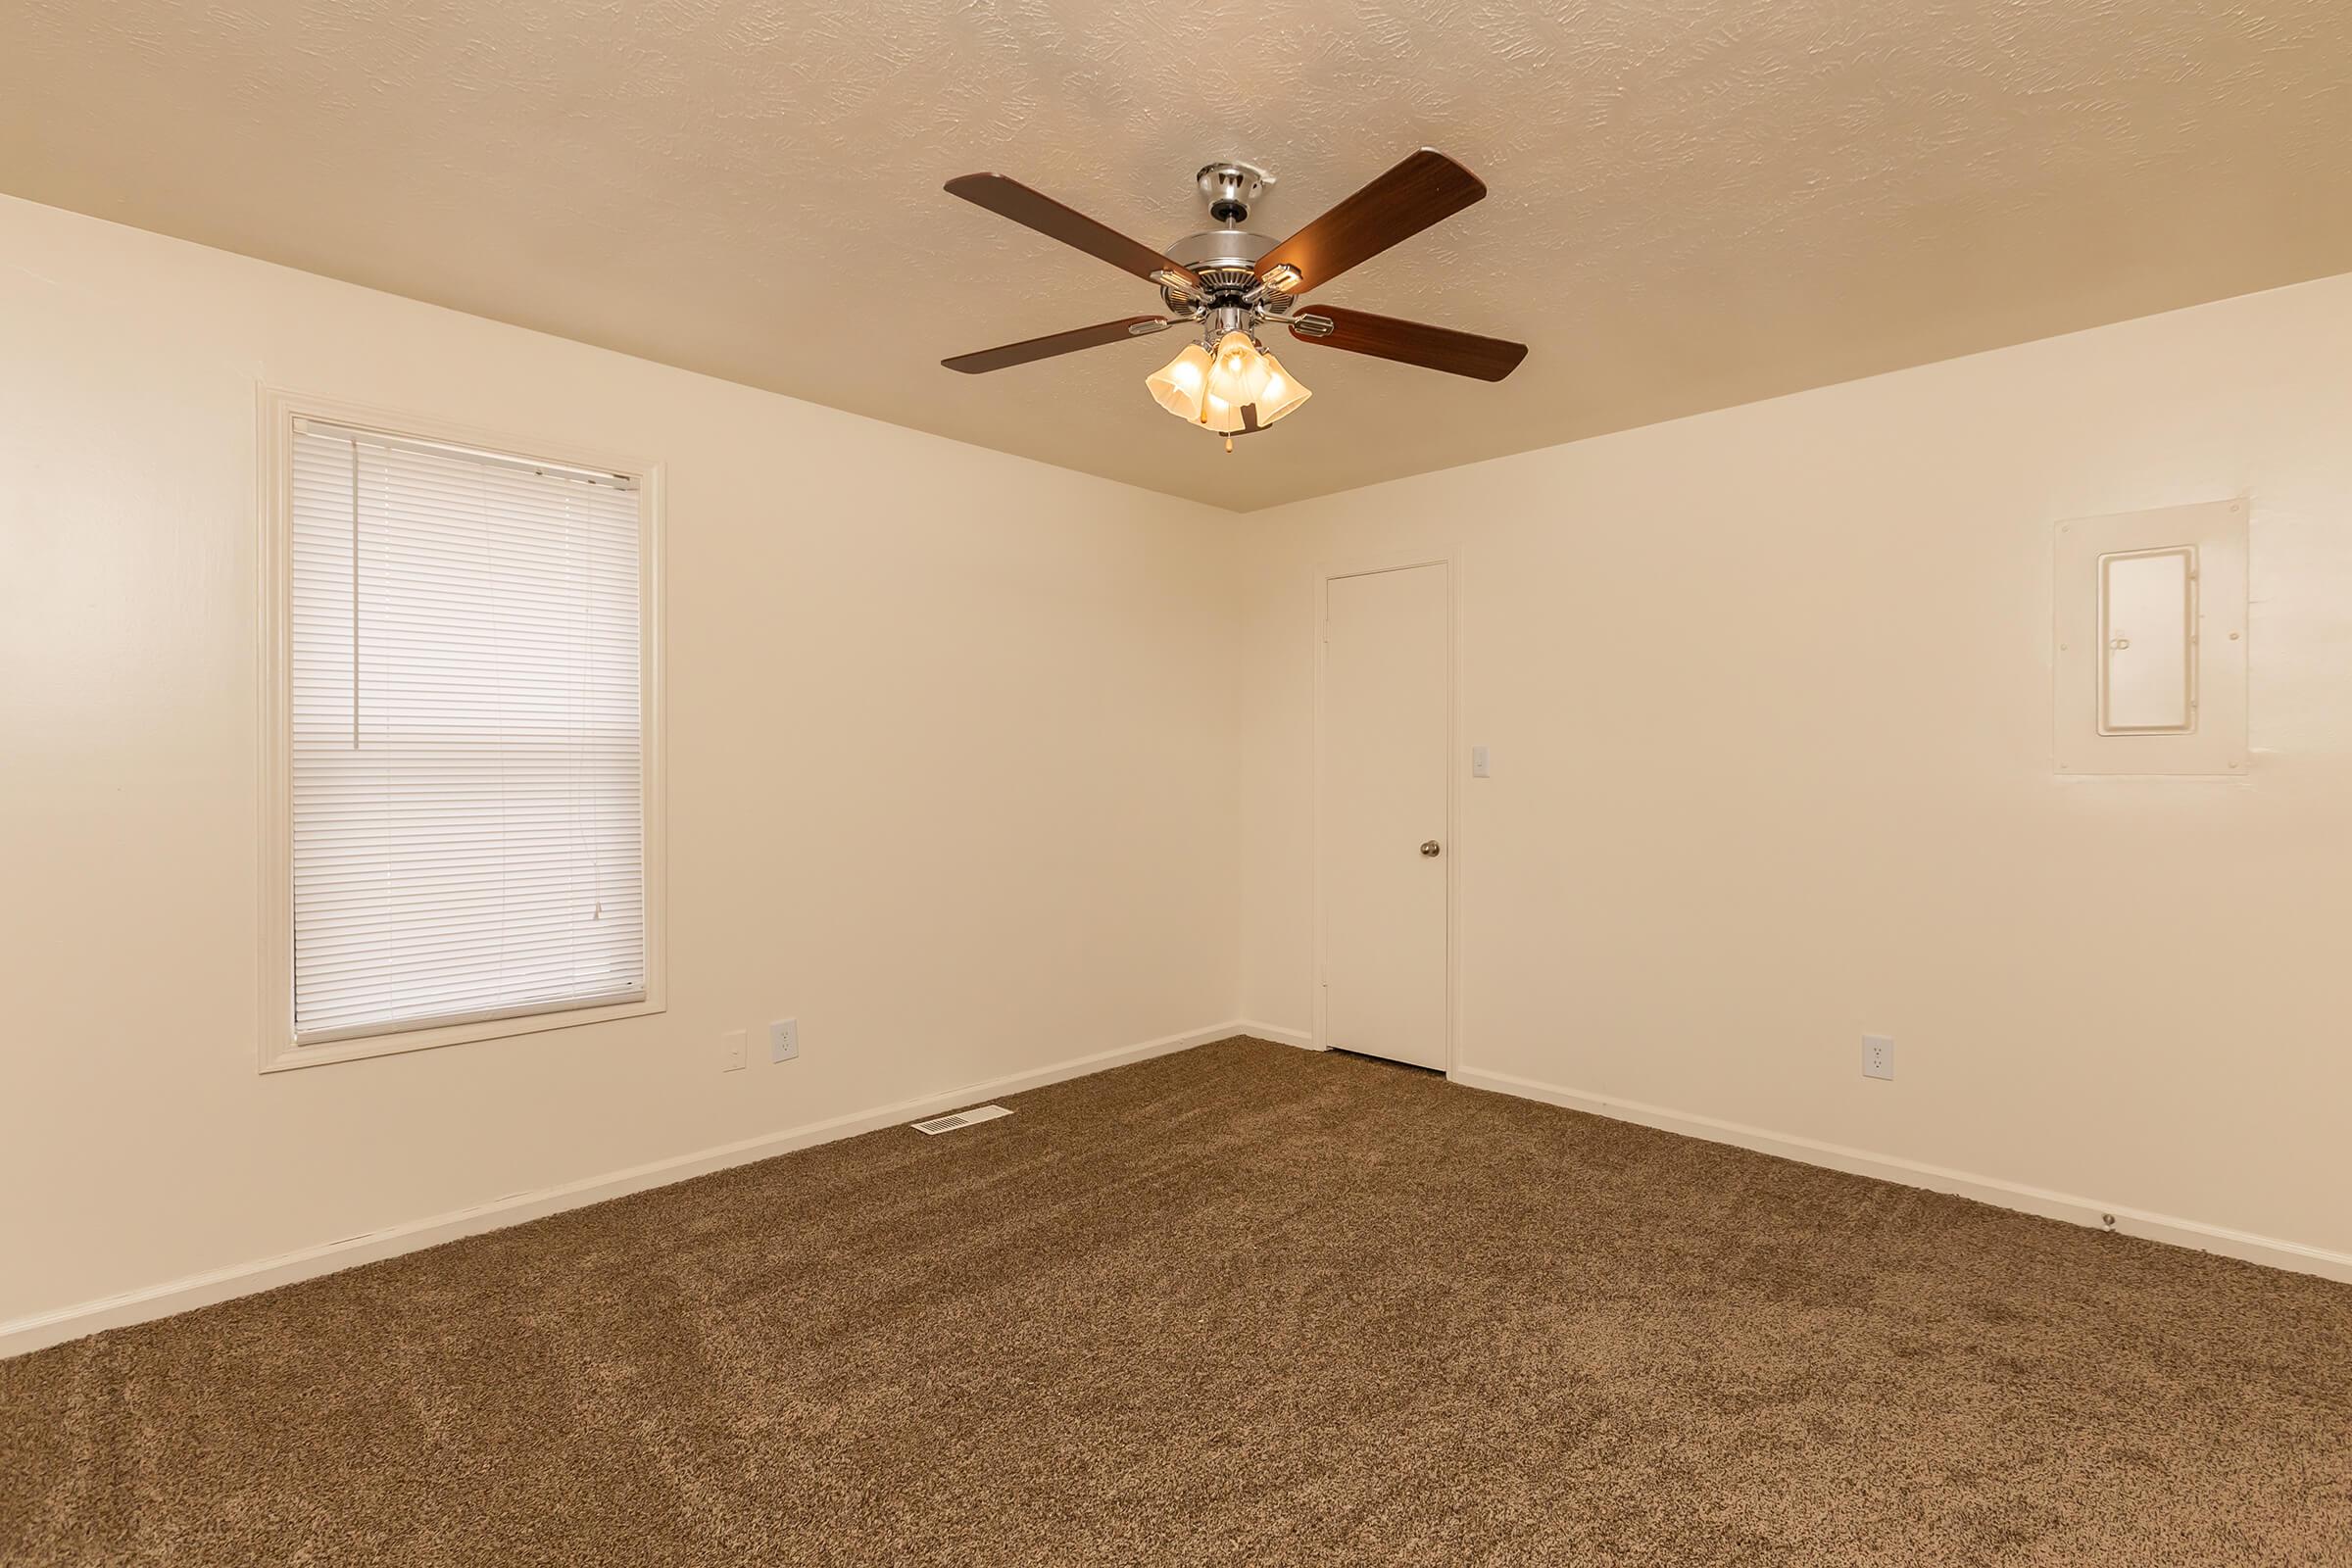 CEILING FANS AND CARPETED FLOORS